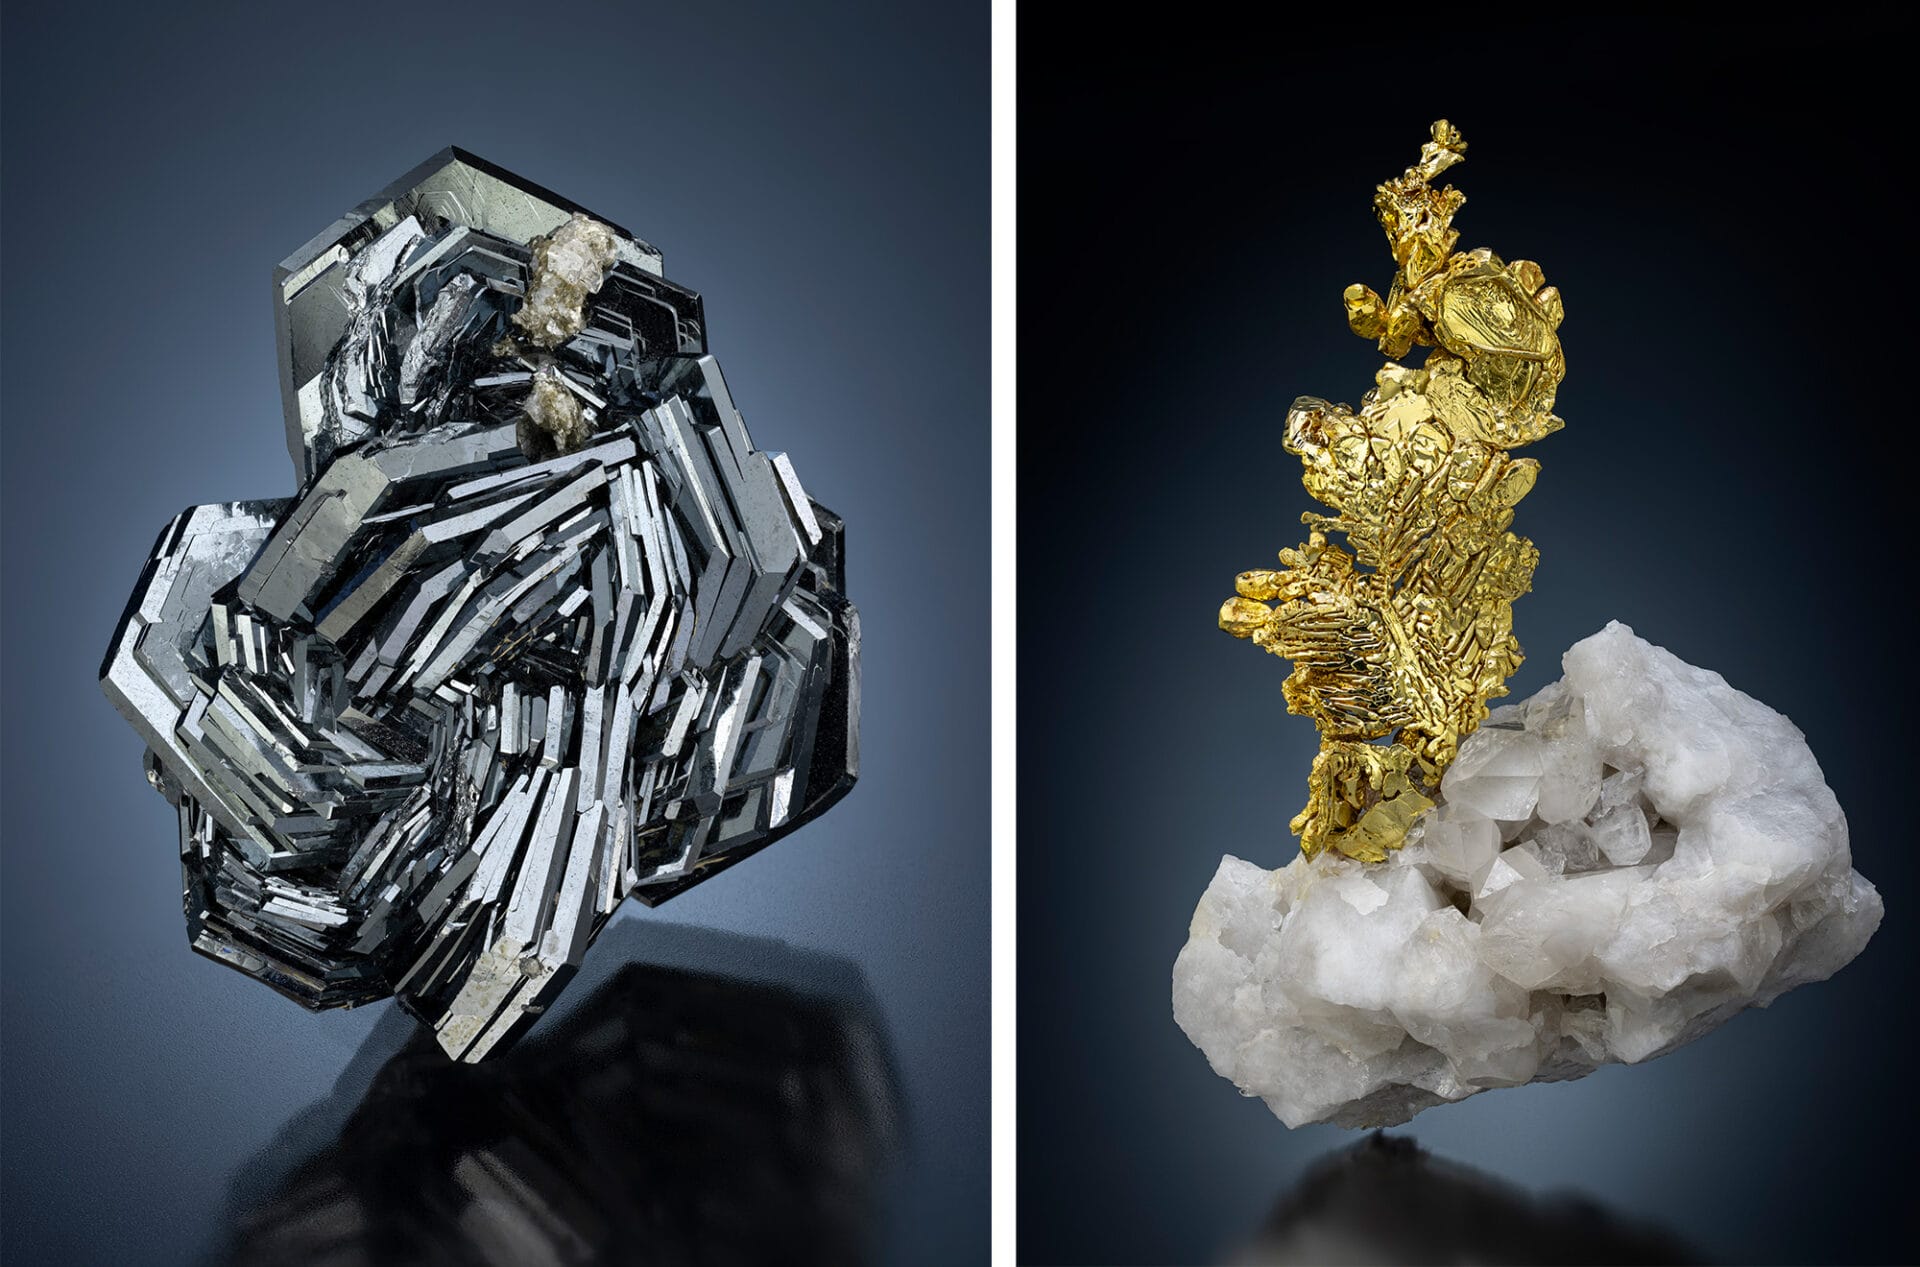 A side-by-side image of two minerals. On the left, a metallic hematite, and on the left, a gold floret grows out of a quartz crystal.